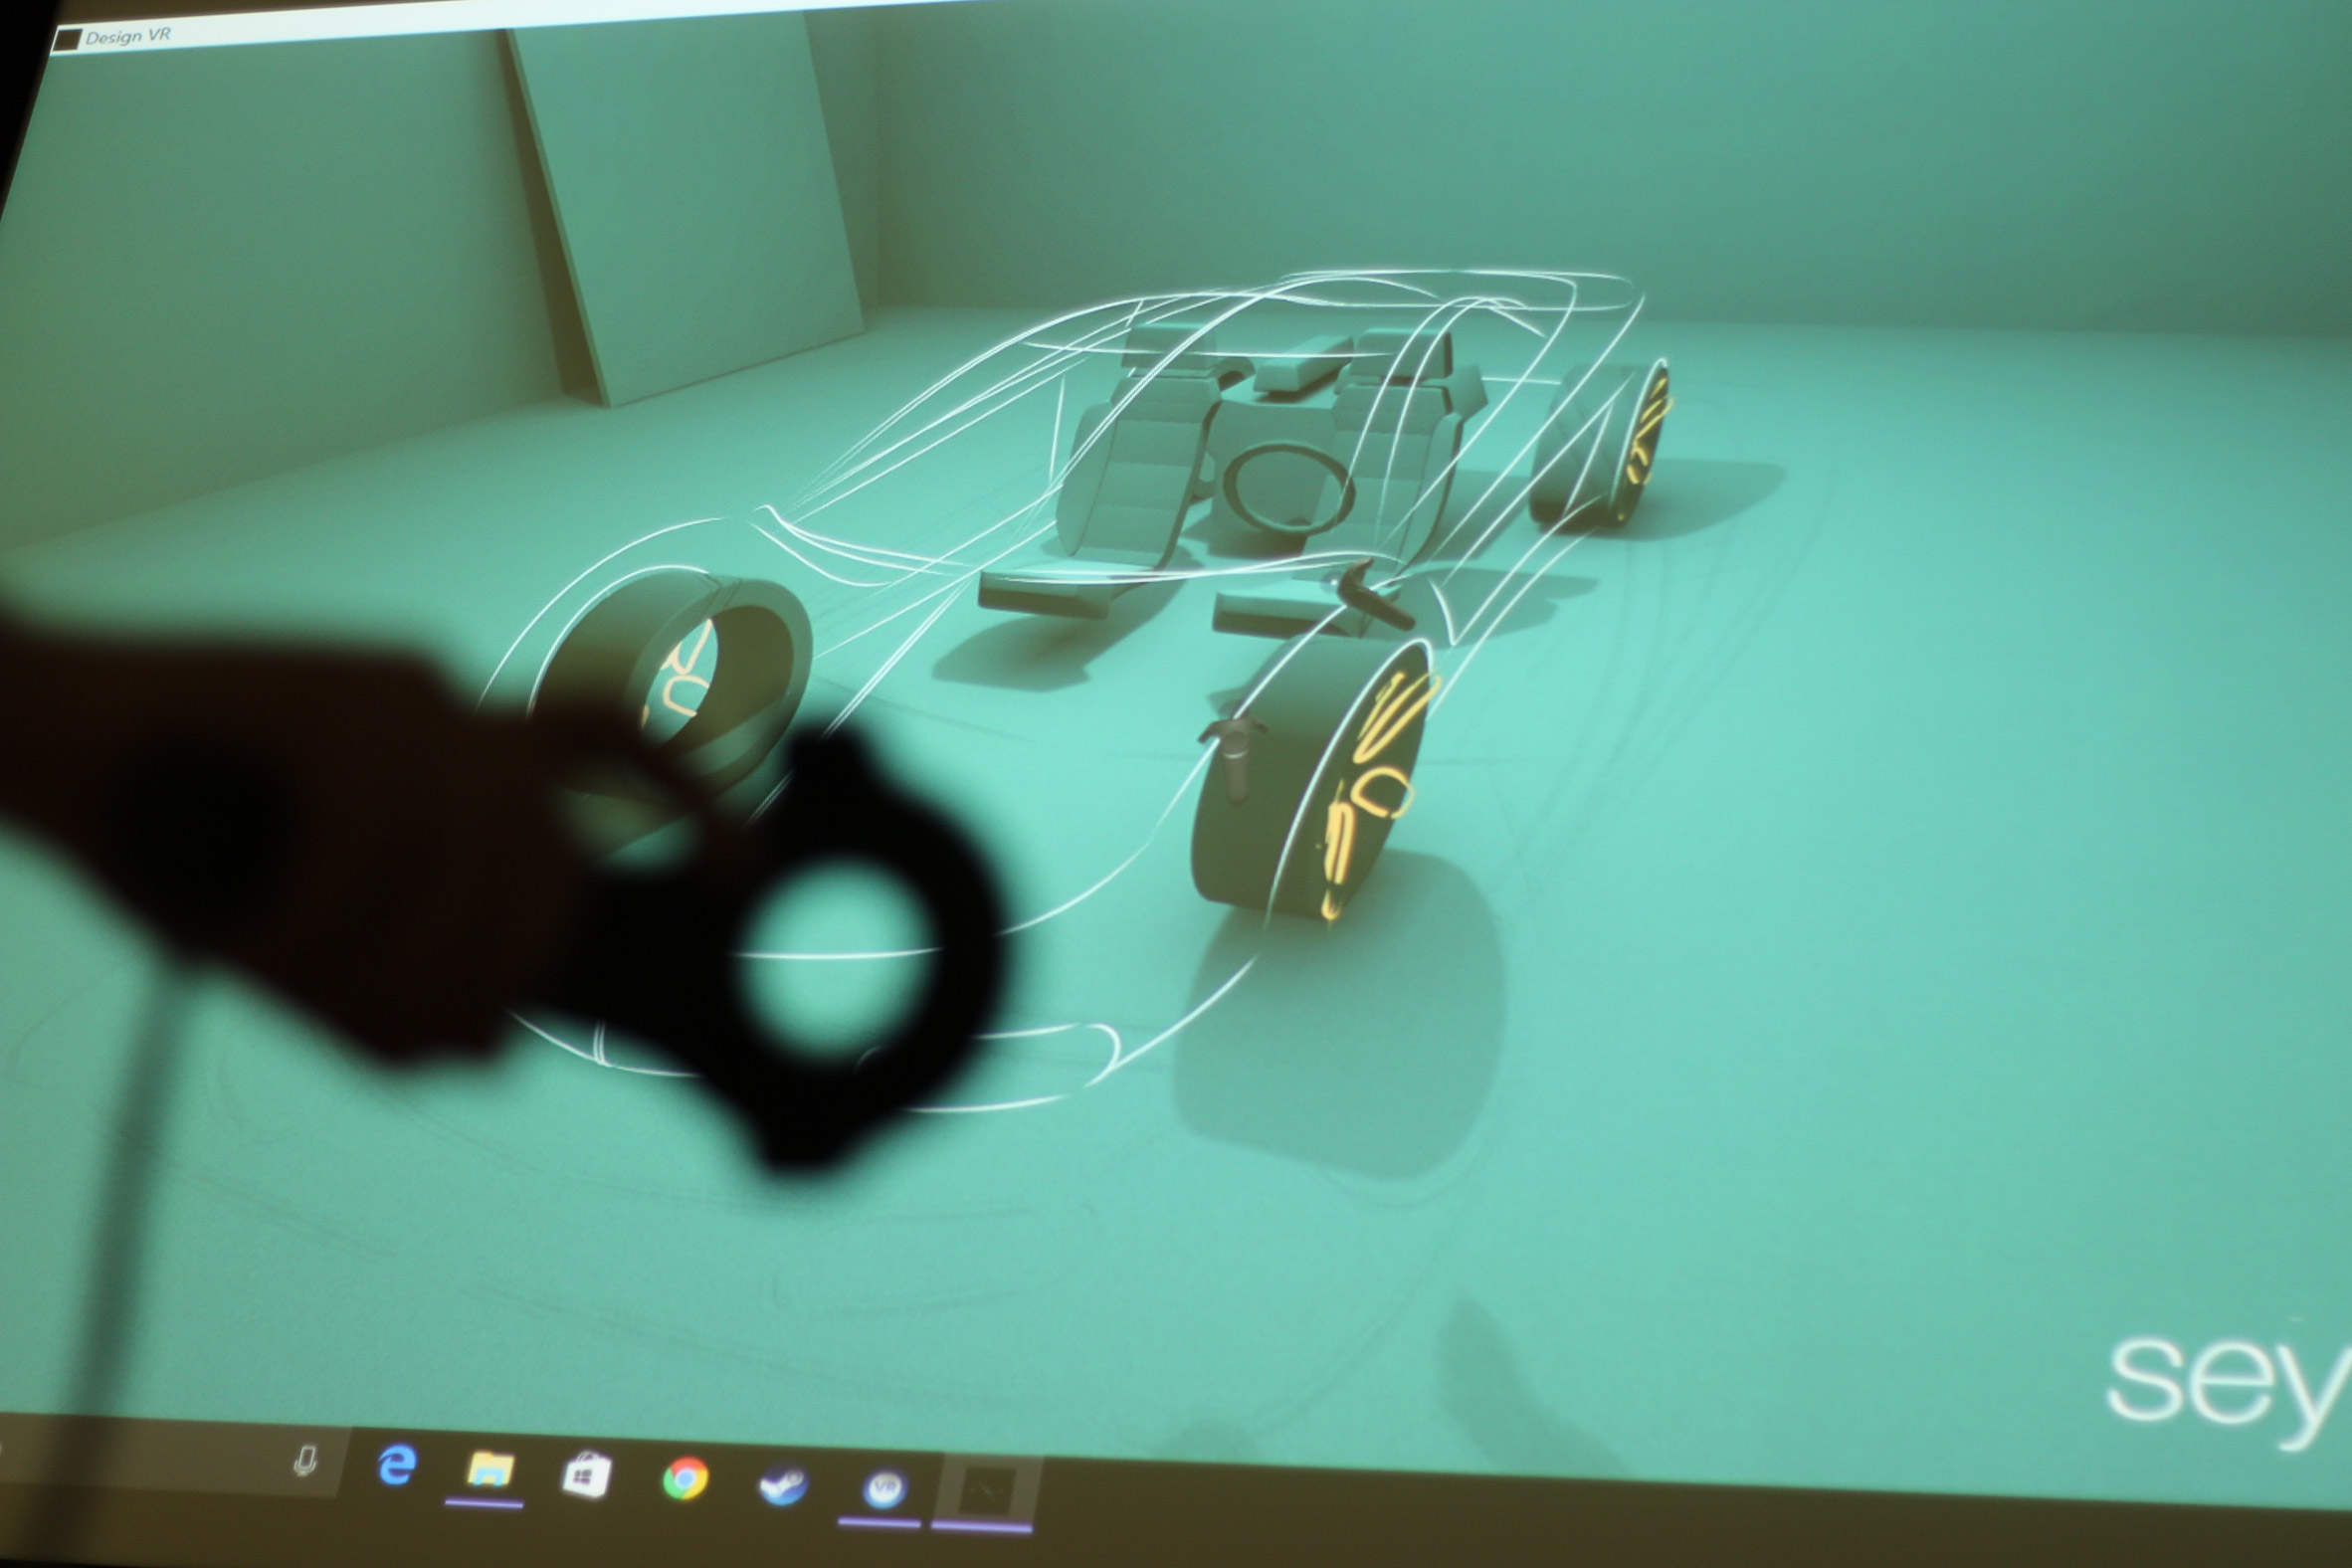 Seymourpowell demos VR software for collaboratively designing cars